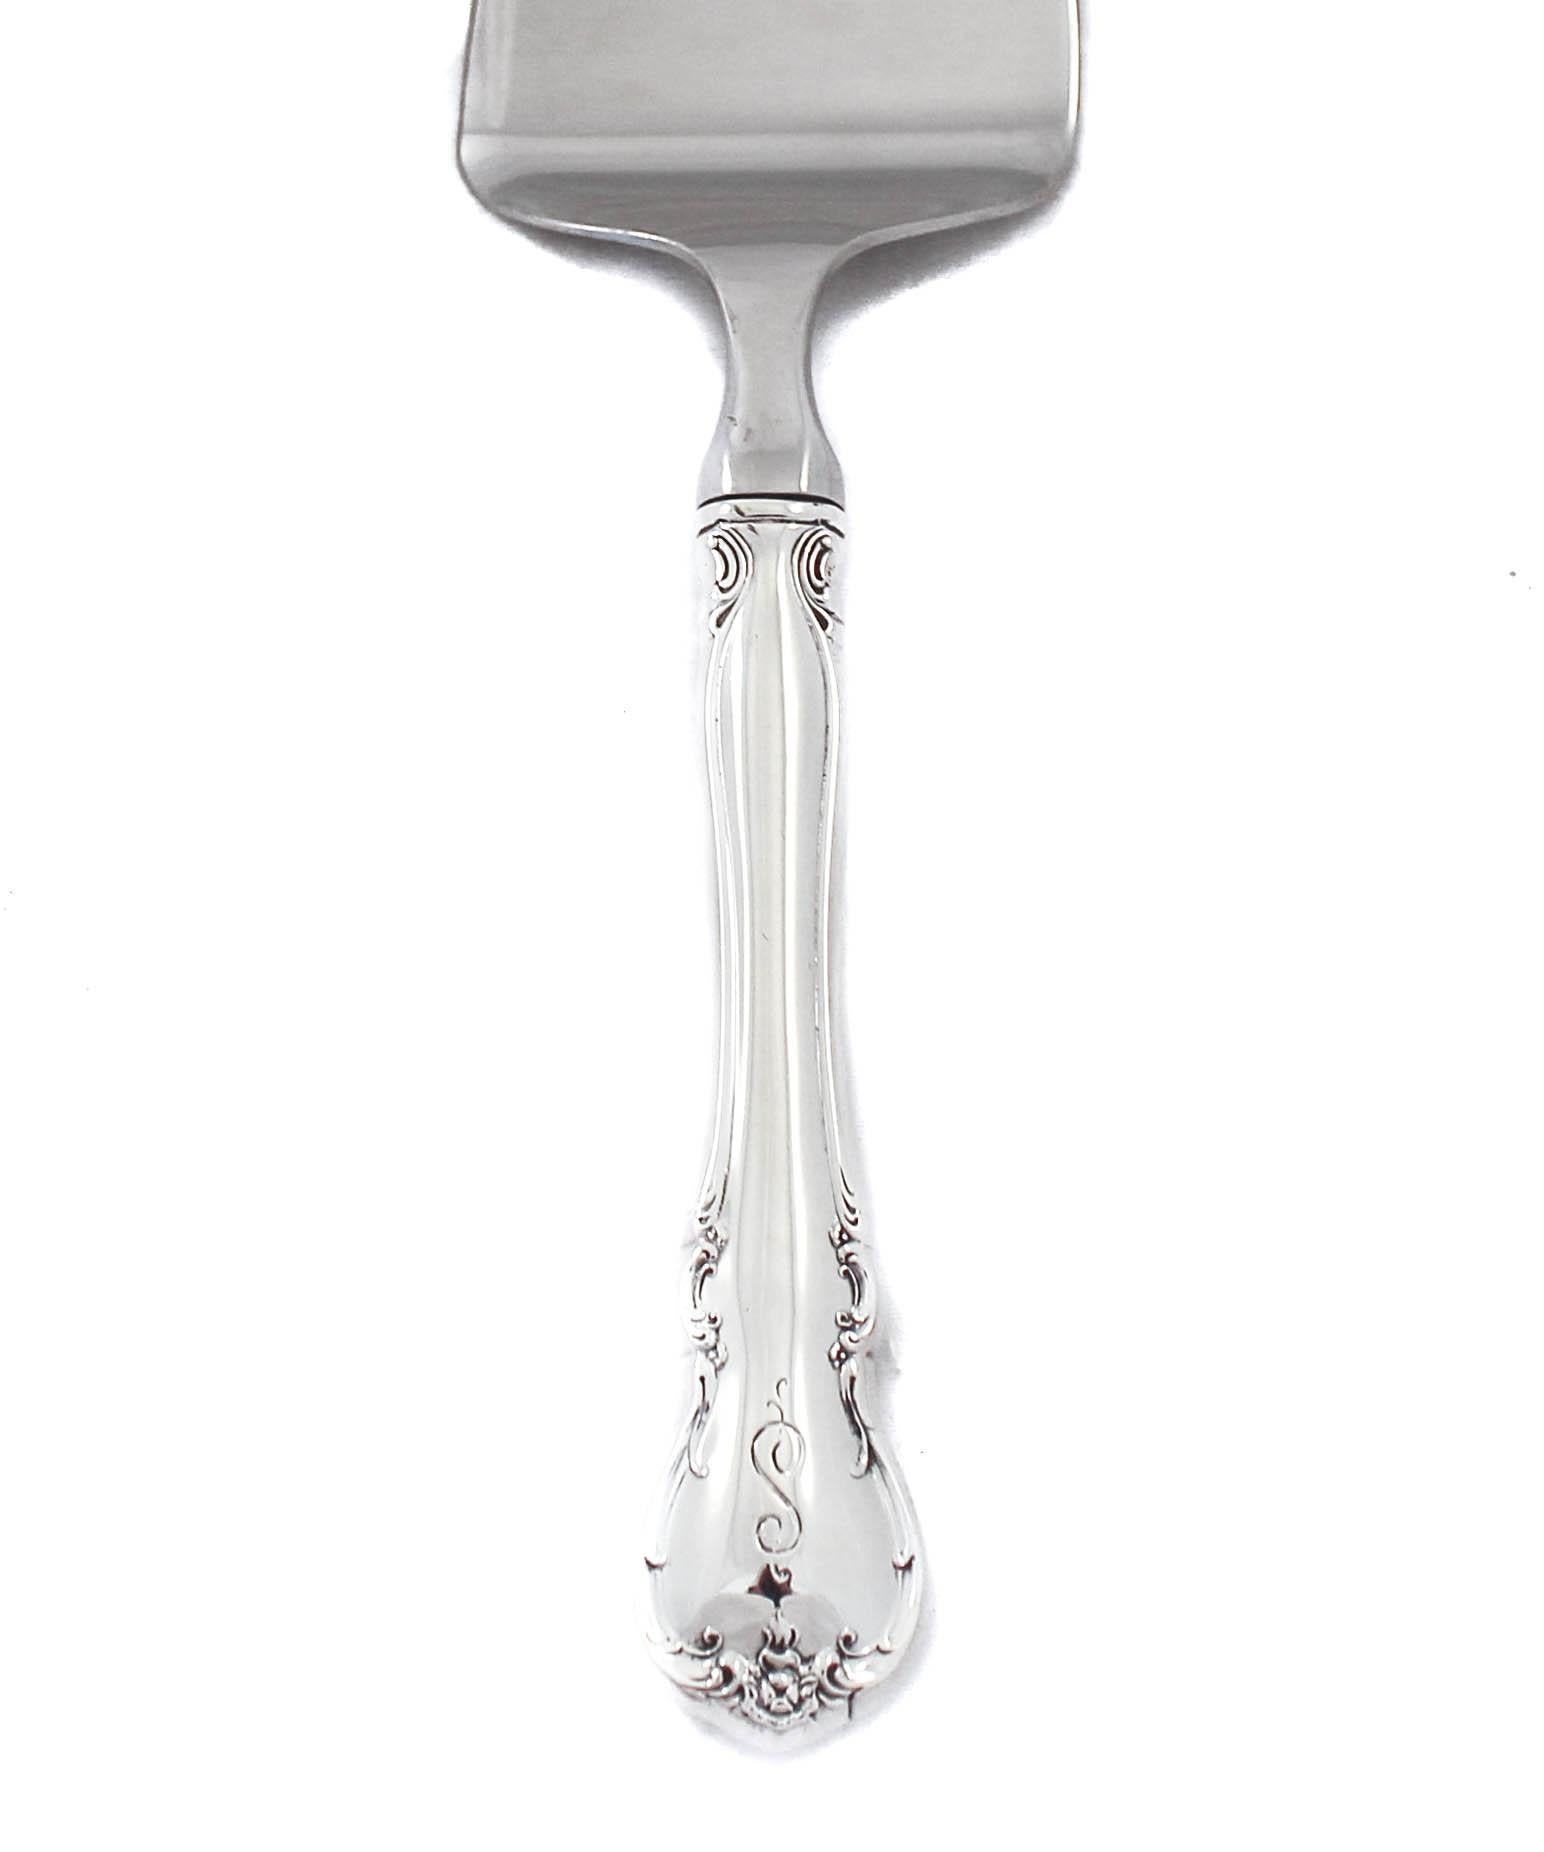 Being offered is a sterling silver server in the French Provincial pattern by Towle Silversmiths. The pattern is understated and delicate. There is a hand engraved script S on the handle.